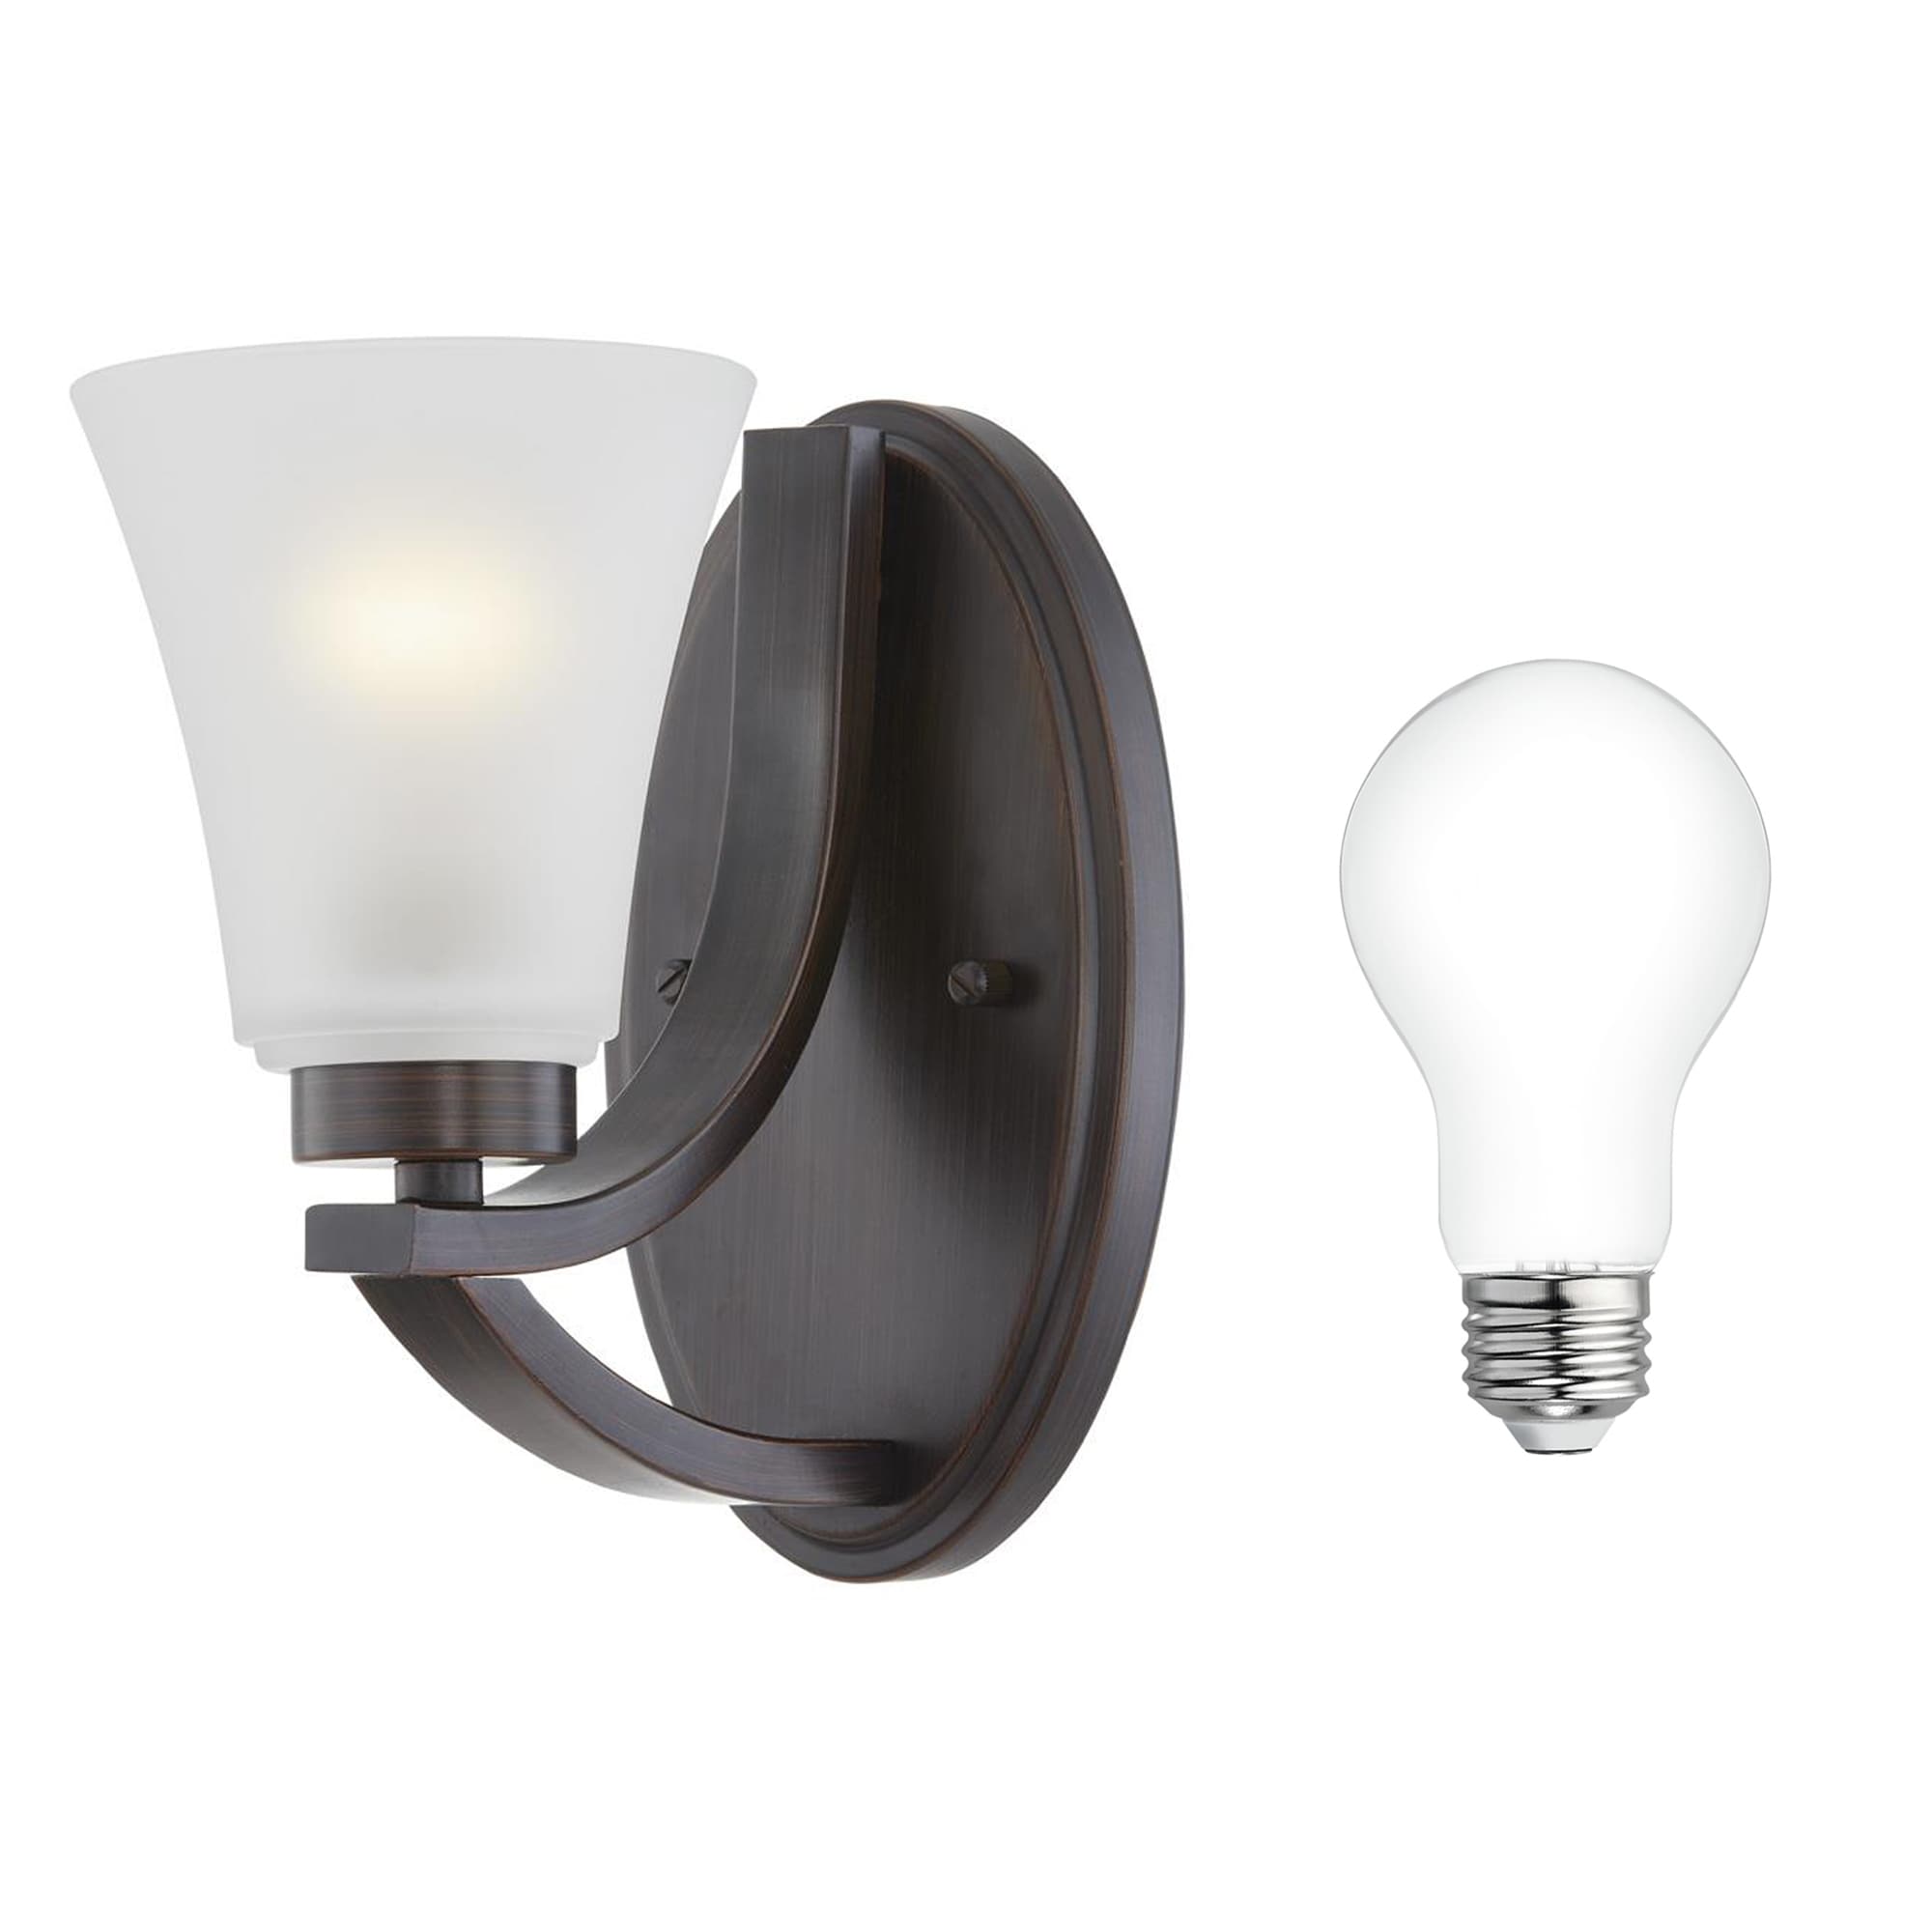 allen + roth Lyndsay 5-in W 1-Light Oil-Rubbed Bronze Transitional Wall Sconce Collection